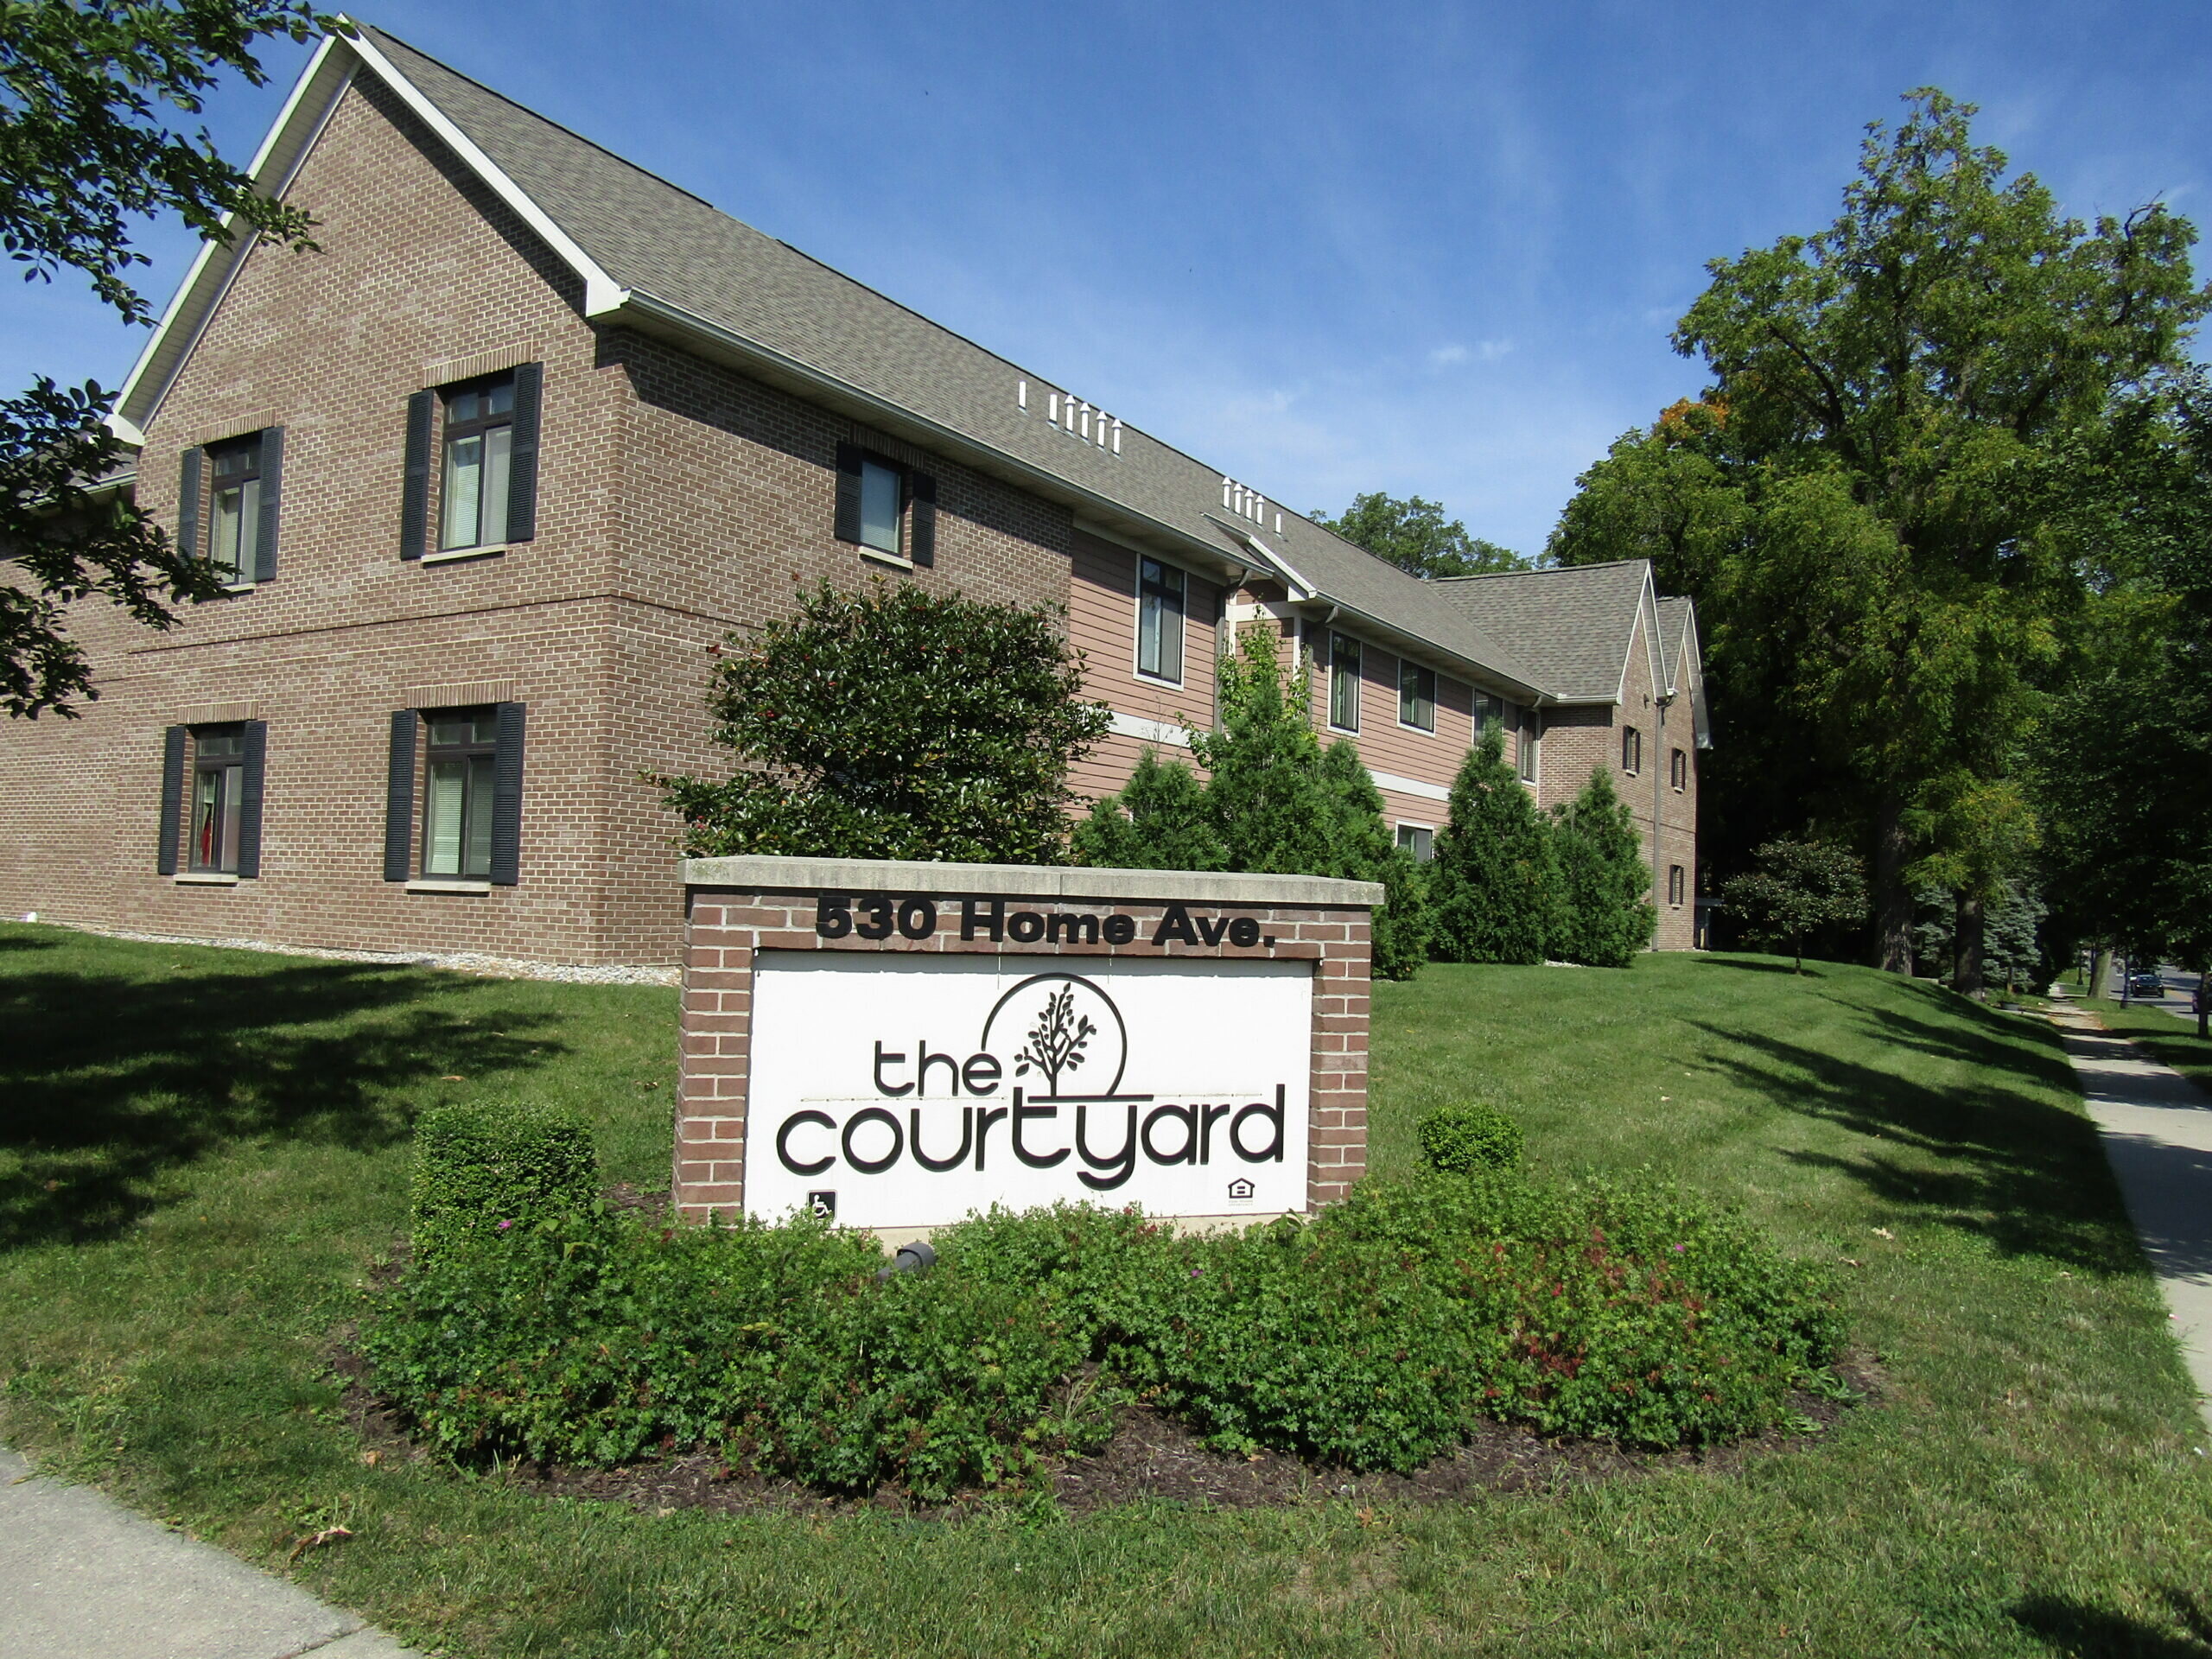 The Courtyard is an apartment complex that houses young adults, usually between ages 18 and 24. Priority is given to those who’ve aged out of the foster care system or who have been, or are in danger of becoming, homeless.